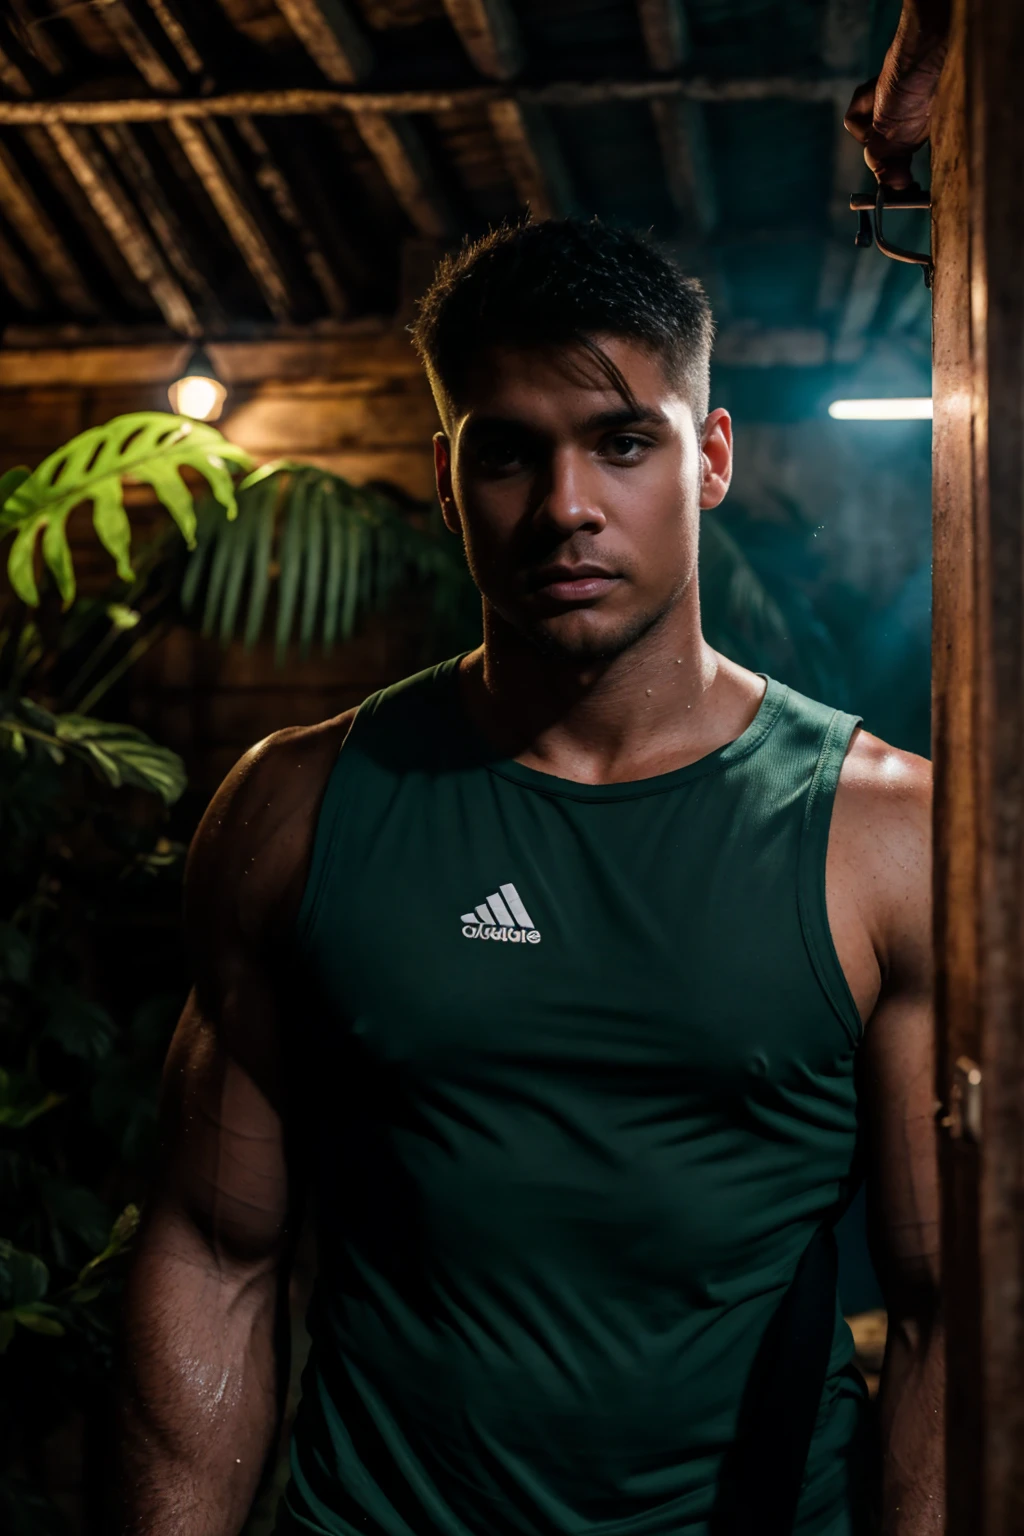 there is a handsome, muscular man walking in the hot and humid jungle, wearing a tight white tank, with a backpack, sweaty, old house, dark cinematic, professional photography, anatomically correct, dynamic lighting, high contrast, color graded